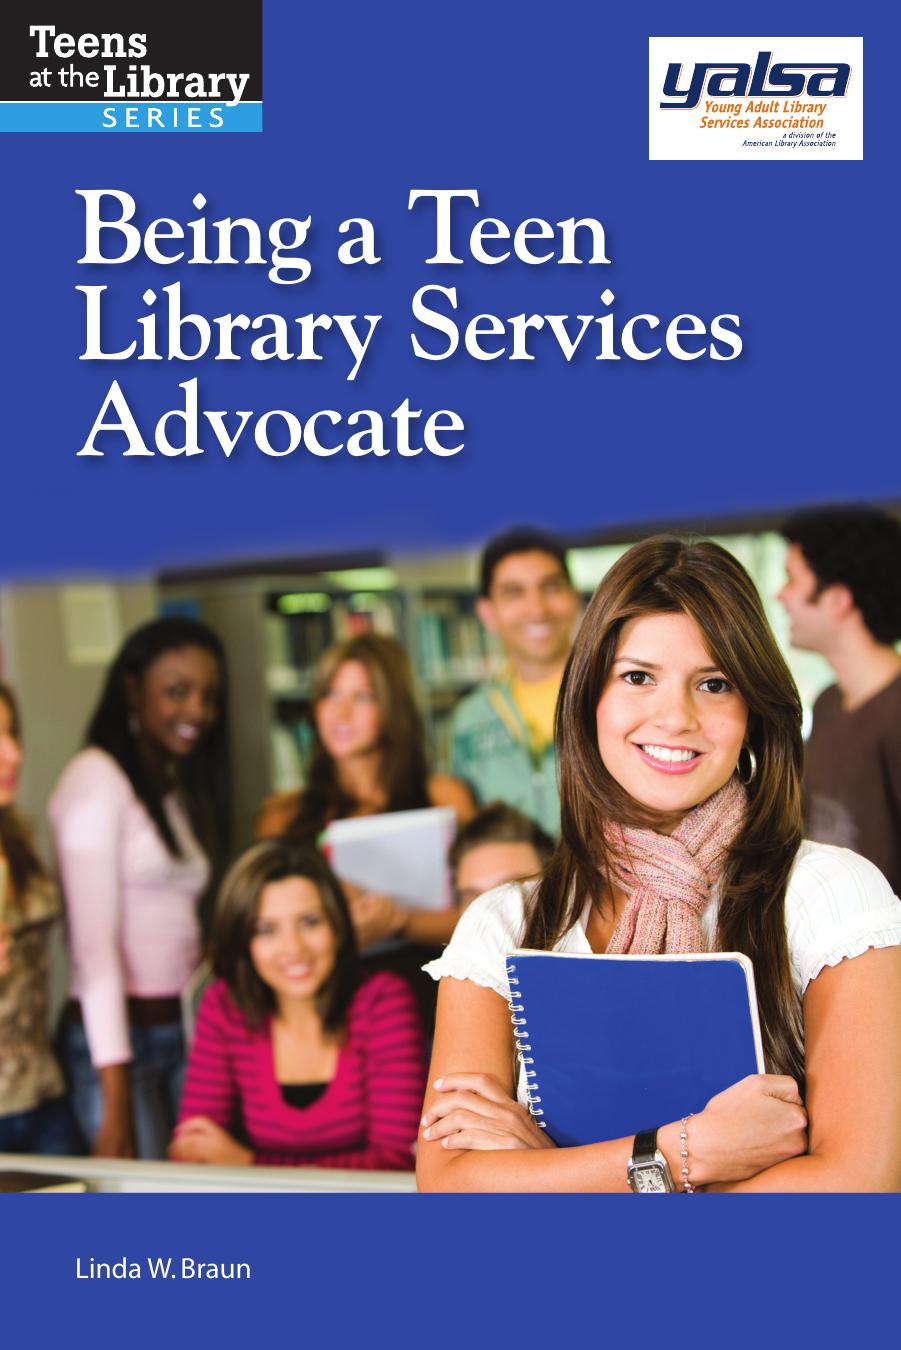 Being a Teen Library Services Advocate by Linda W. Braun